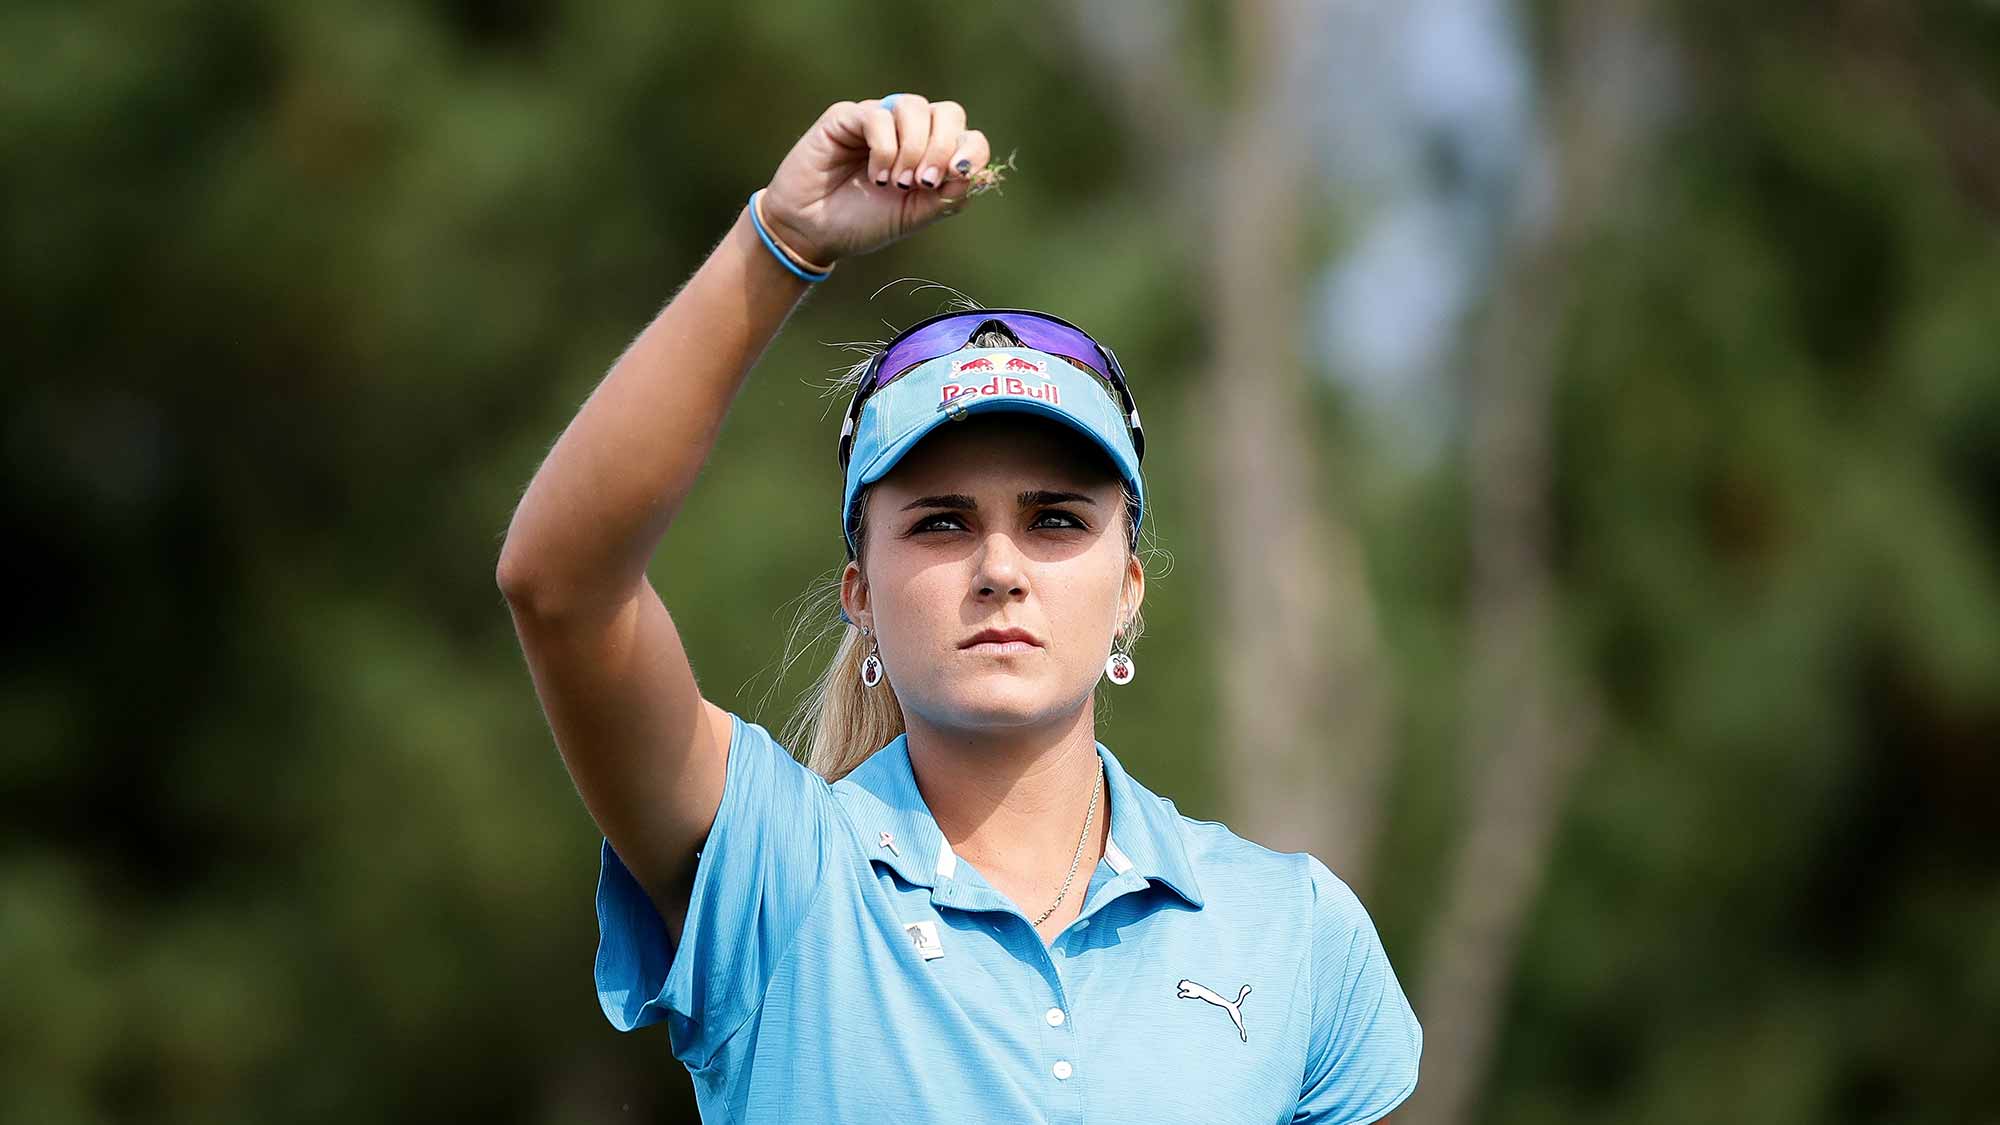 Lexi Thompson of United States on the 3rd hole during the first round of the LPGA KEB-Hana Bank Championship at the Sky 72 Golf Club Ocean Course